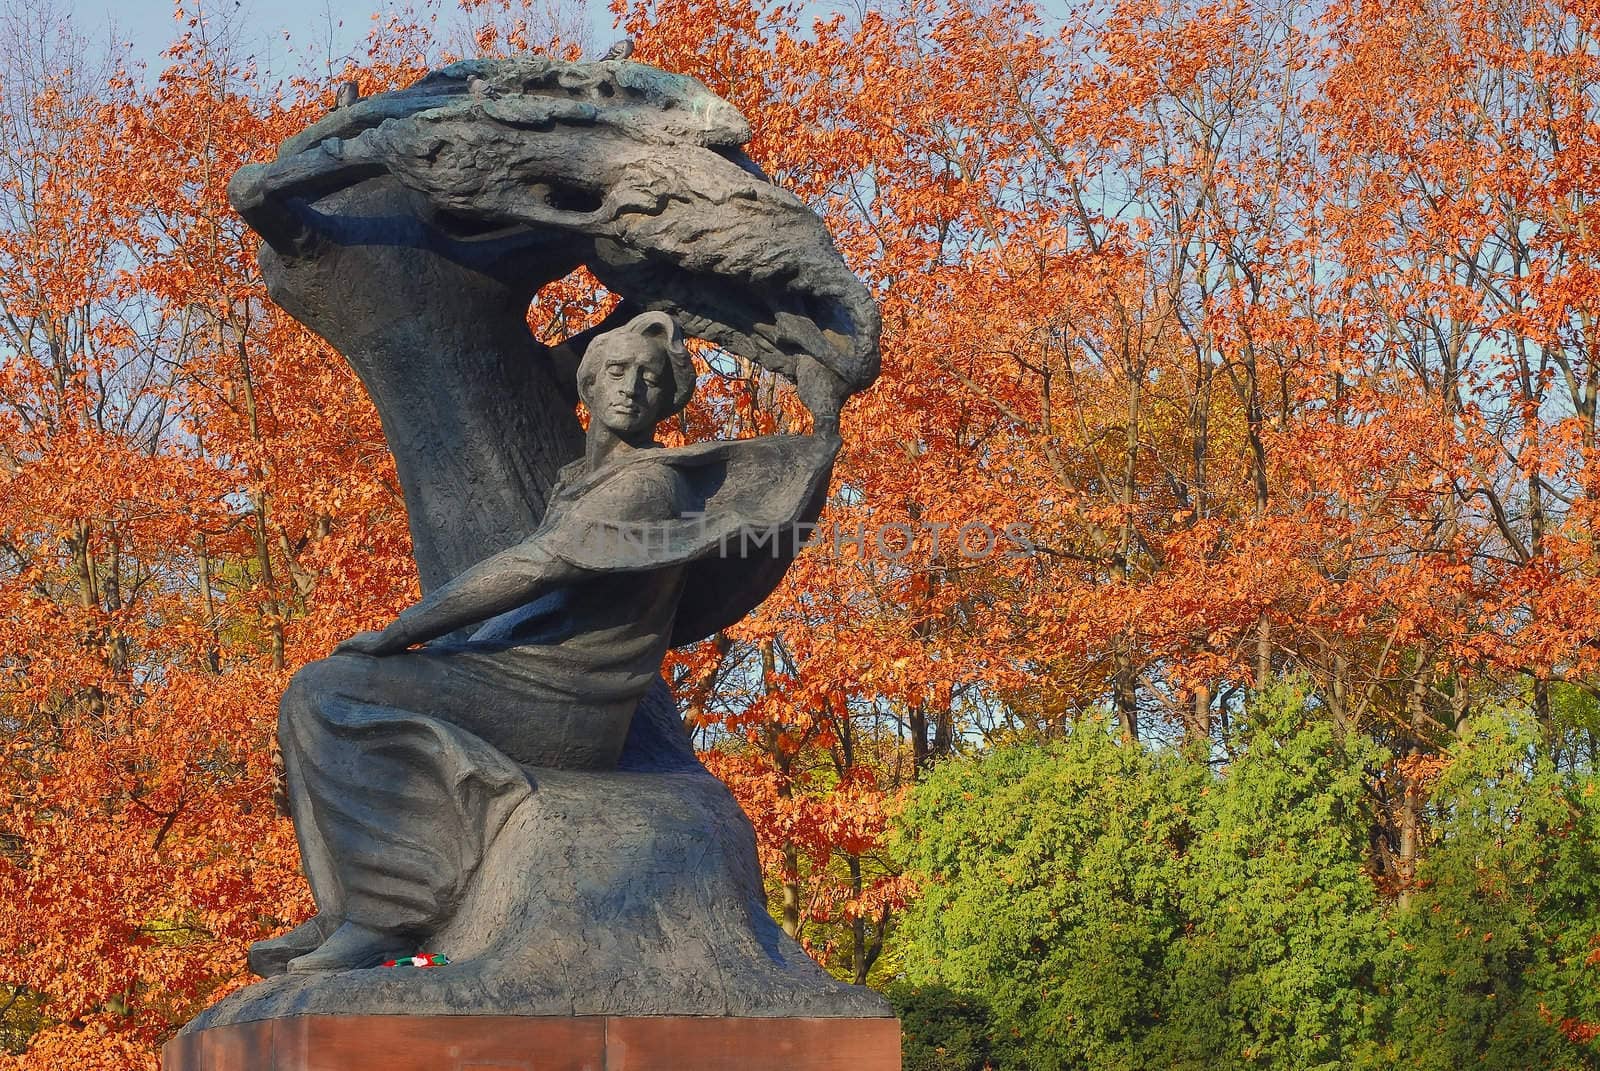 Chopin bronze old monument in Lazienki park in Warsaw. Autumn time.